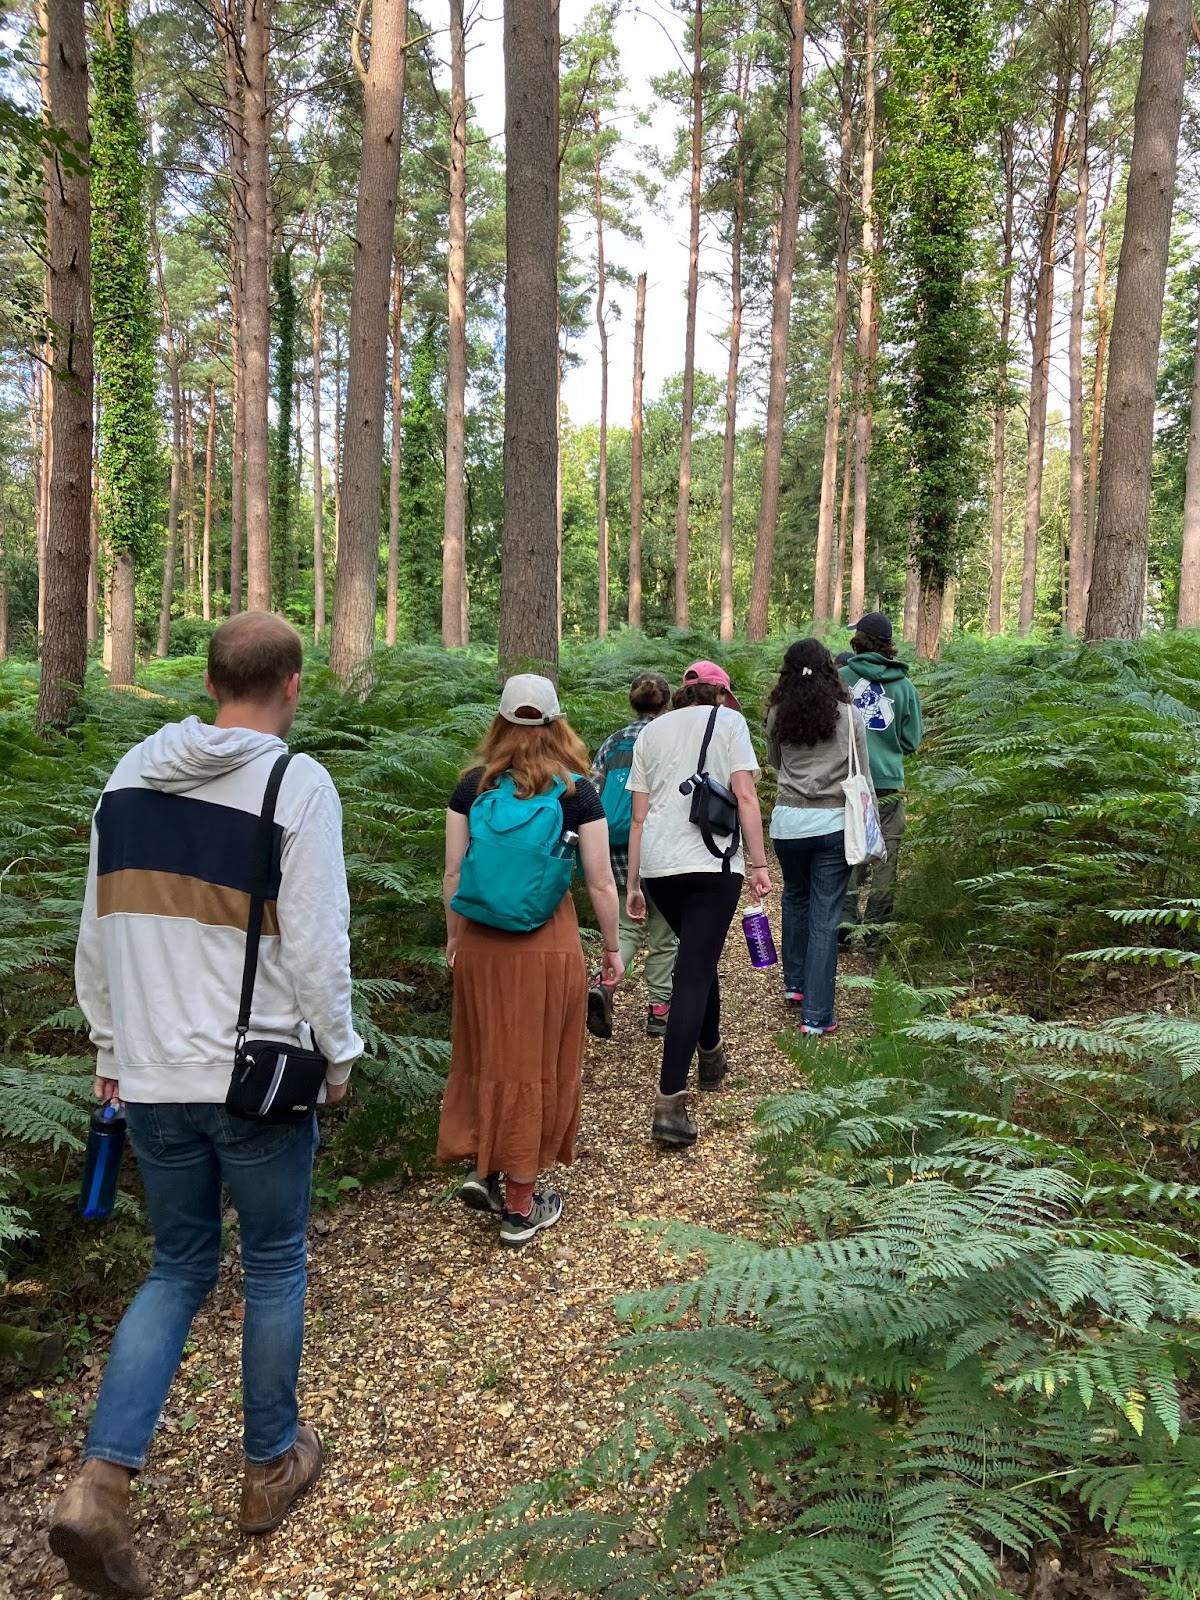 The Young Leaders Course attendees walking along a footpath in the New Forest, surrounded by bracken and tall trees.